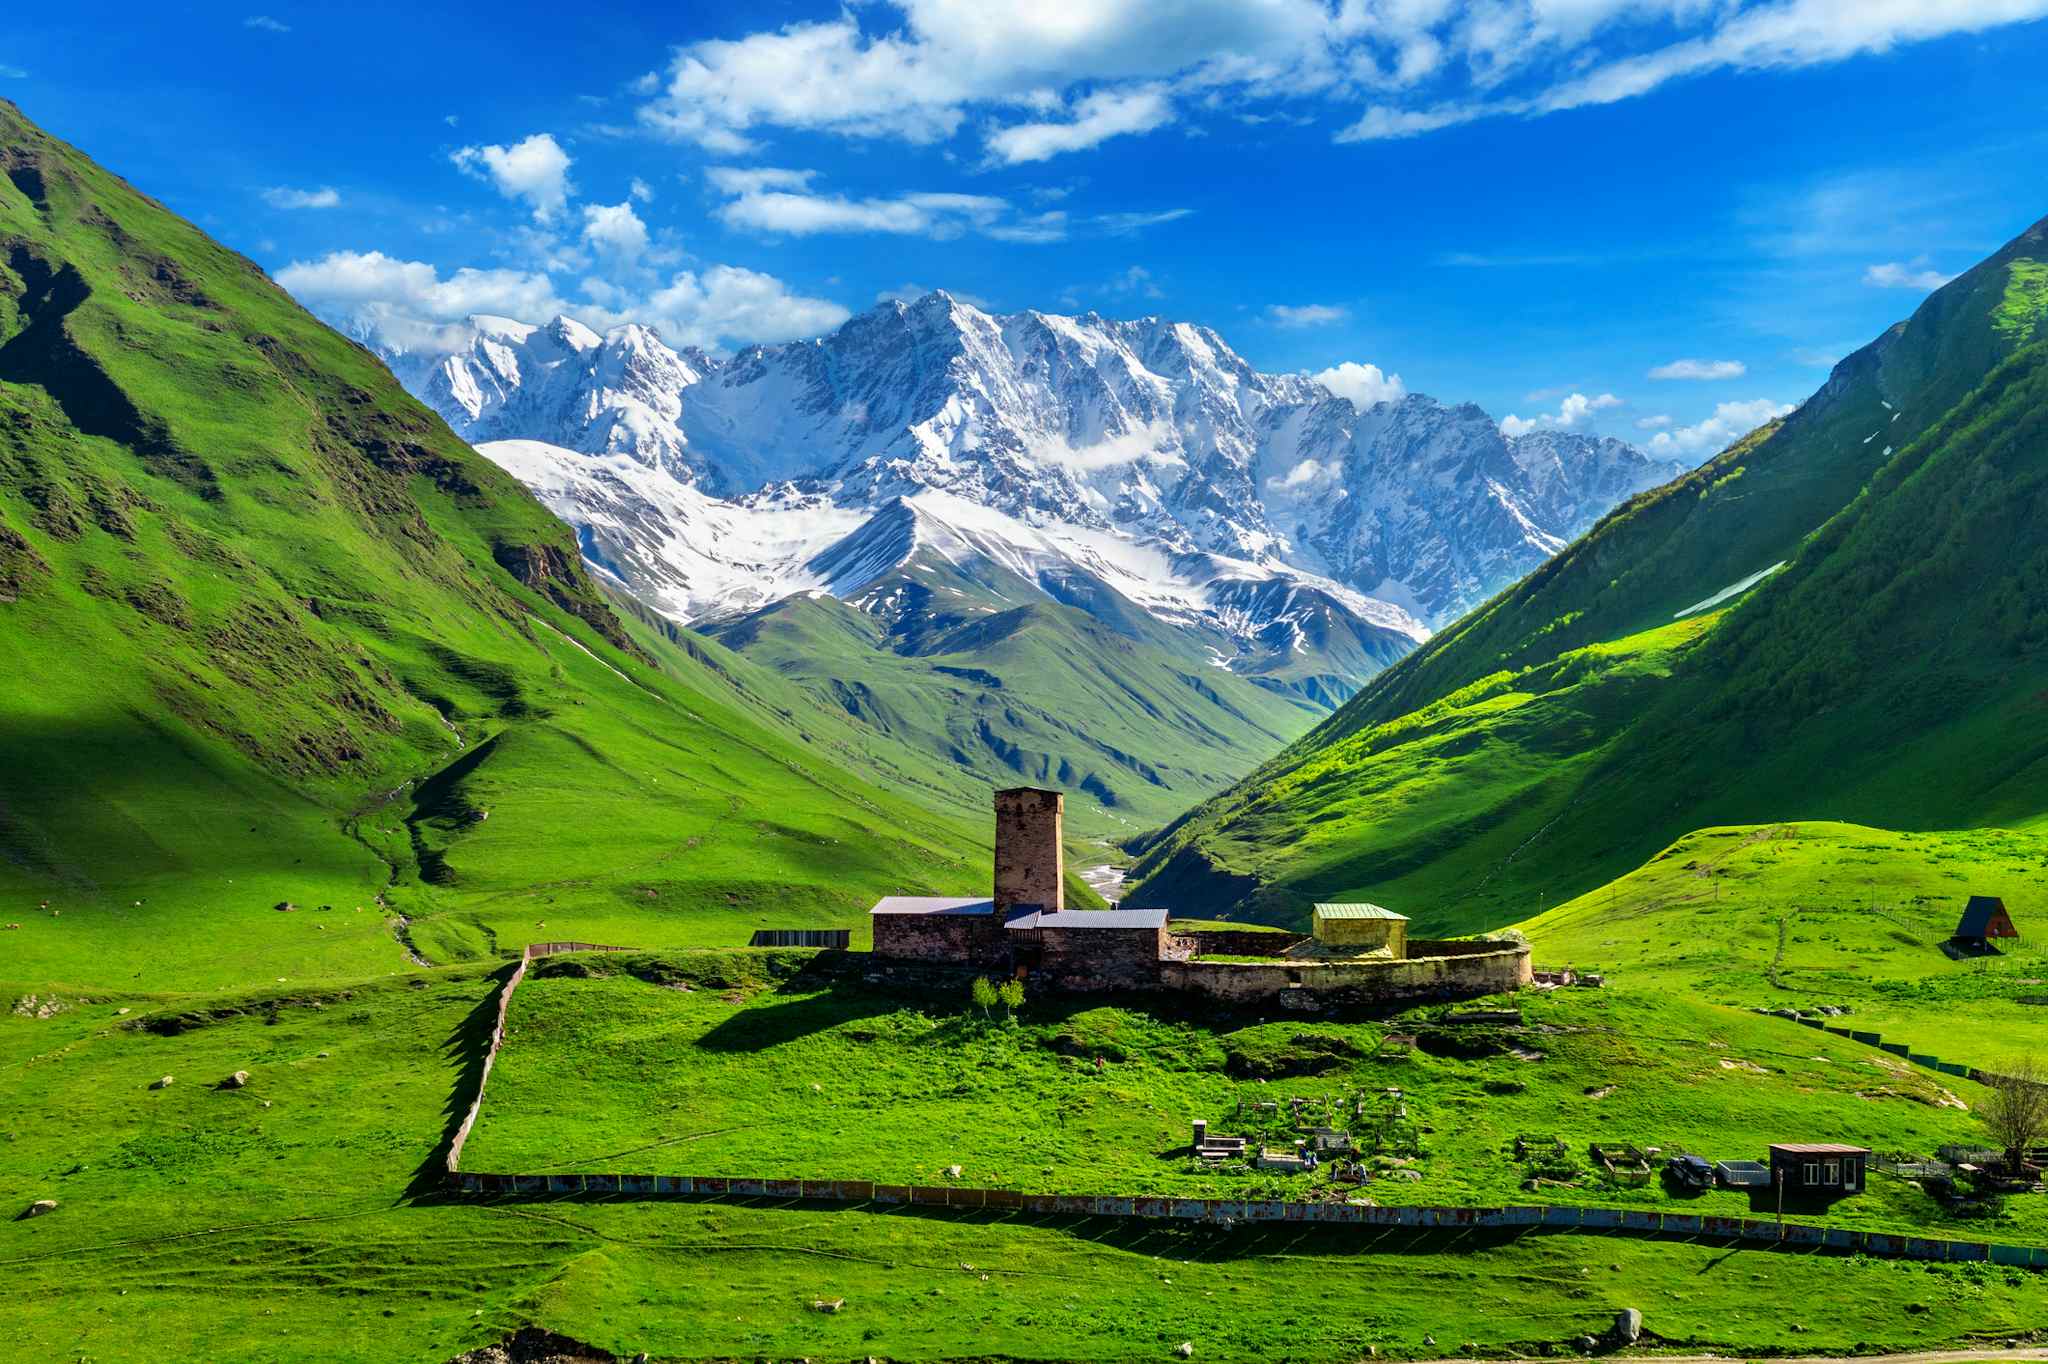 Ushguli, one of the highest villages in Europe. Photo: Getty.